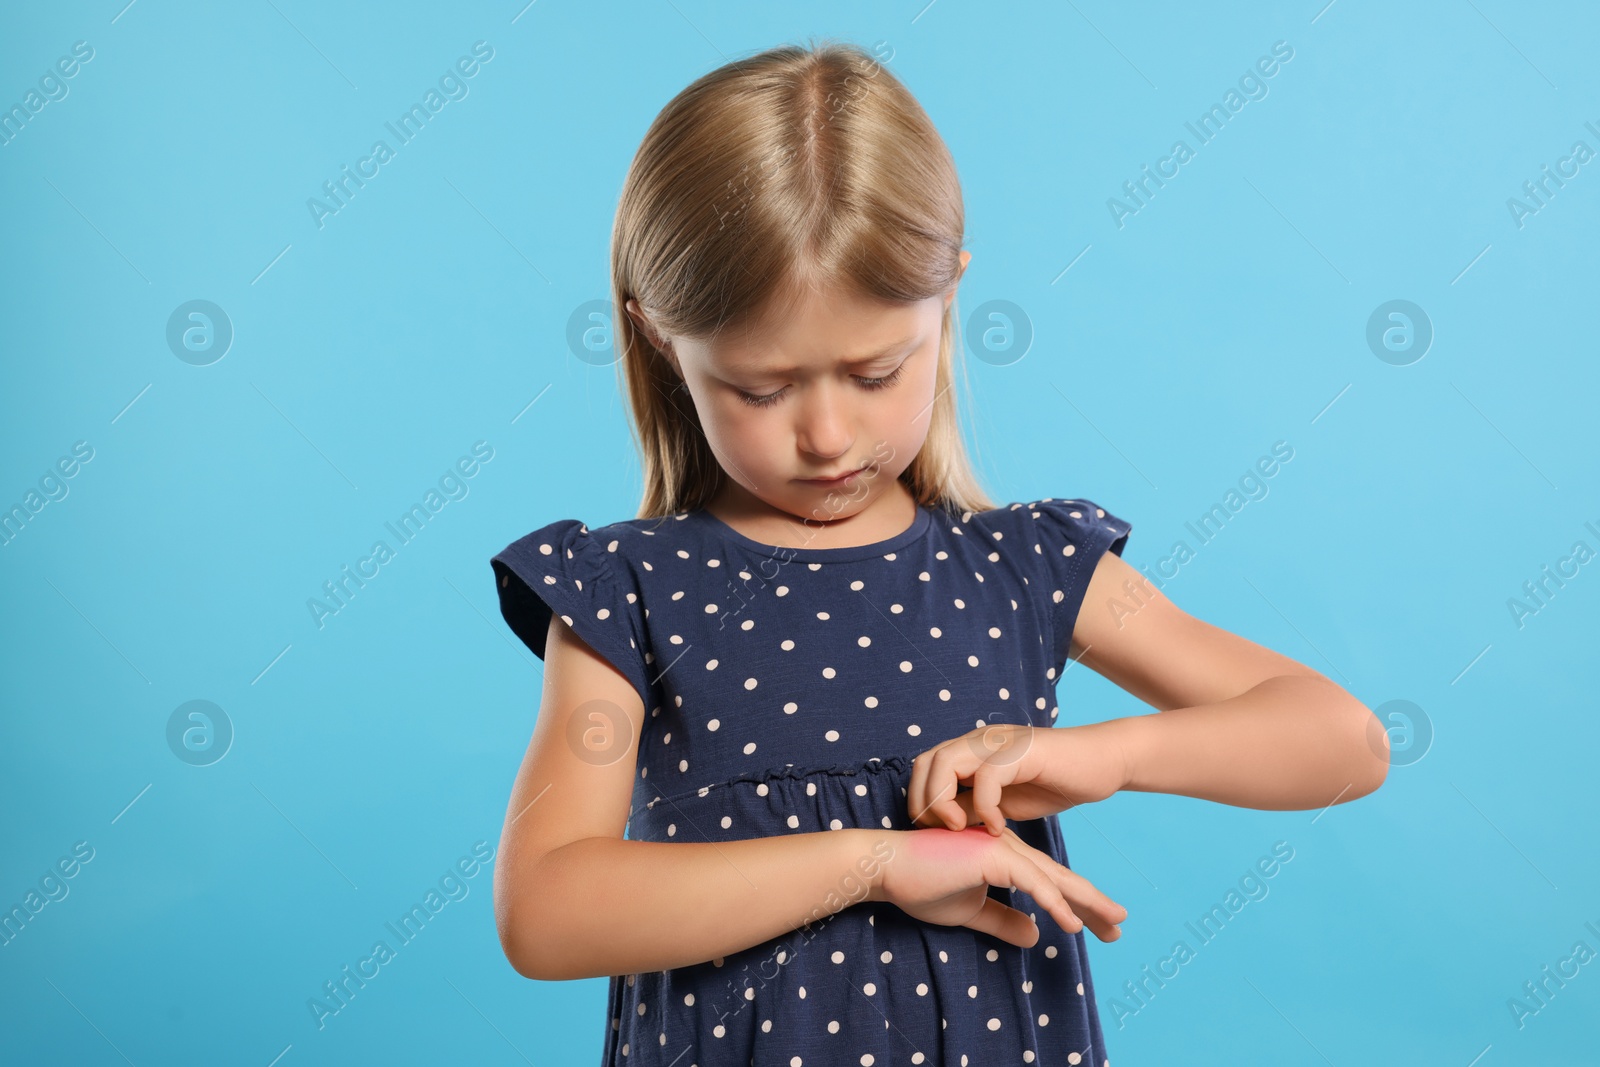 Photo of Suffering from allergy. Little girl scratching her hand on light blue background